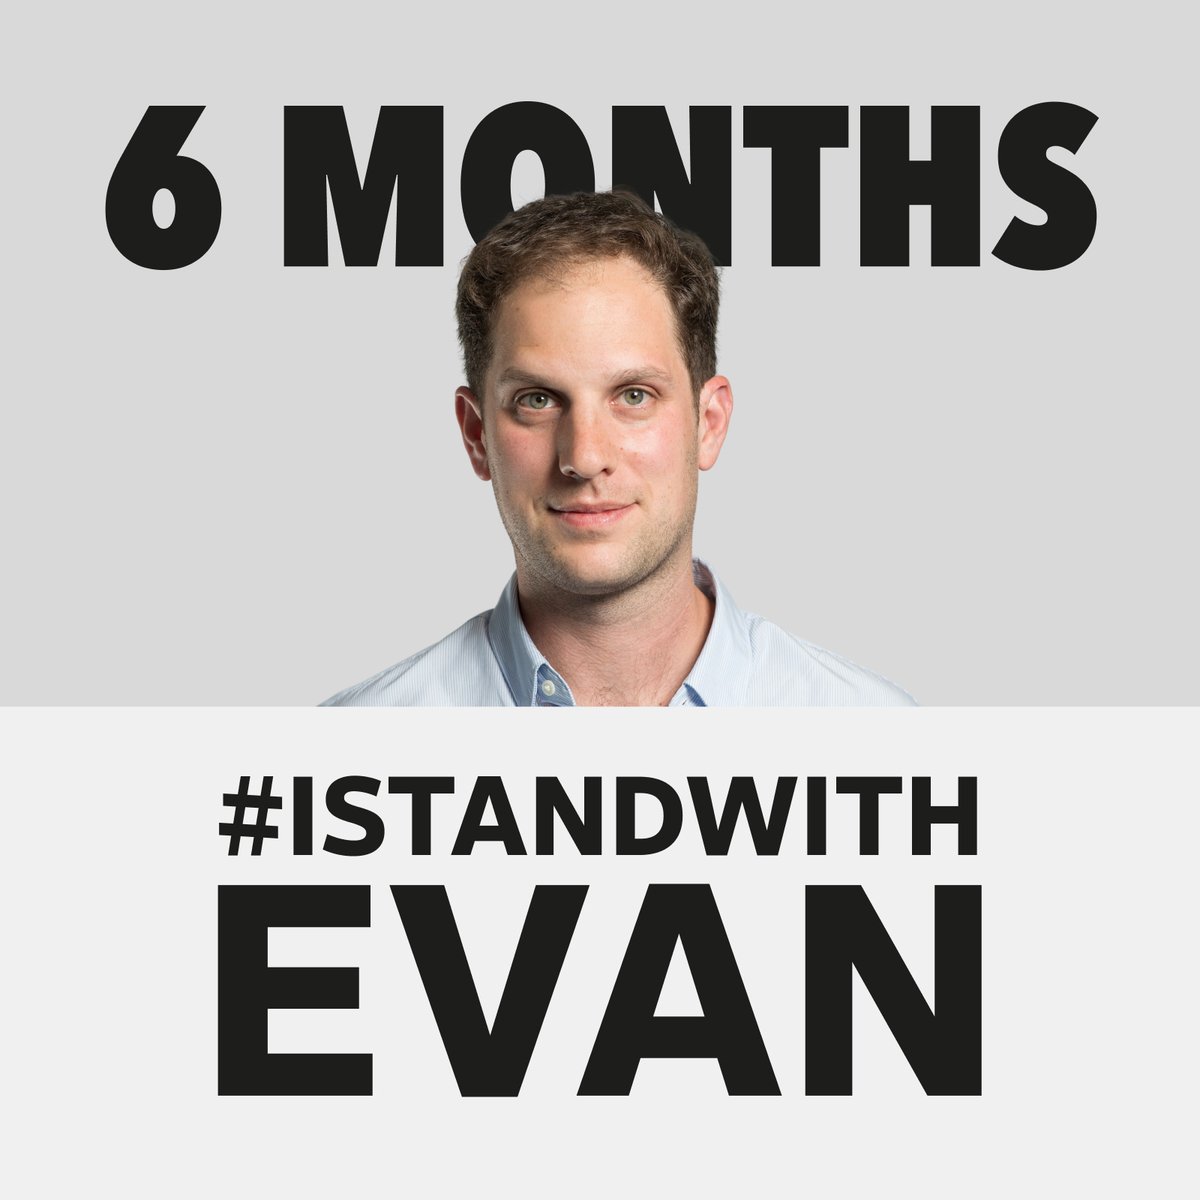 It has been 6 months since Wall Street Journal reporter Evan Gershkovich was wrongfully detained by Russia during a reporting trip and falsely accused of espionage. Bloomberg joins The Wall Street Journal in calling for his immediate release #IStandWithEvan